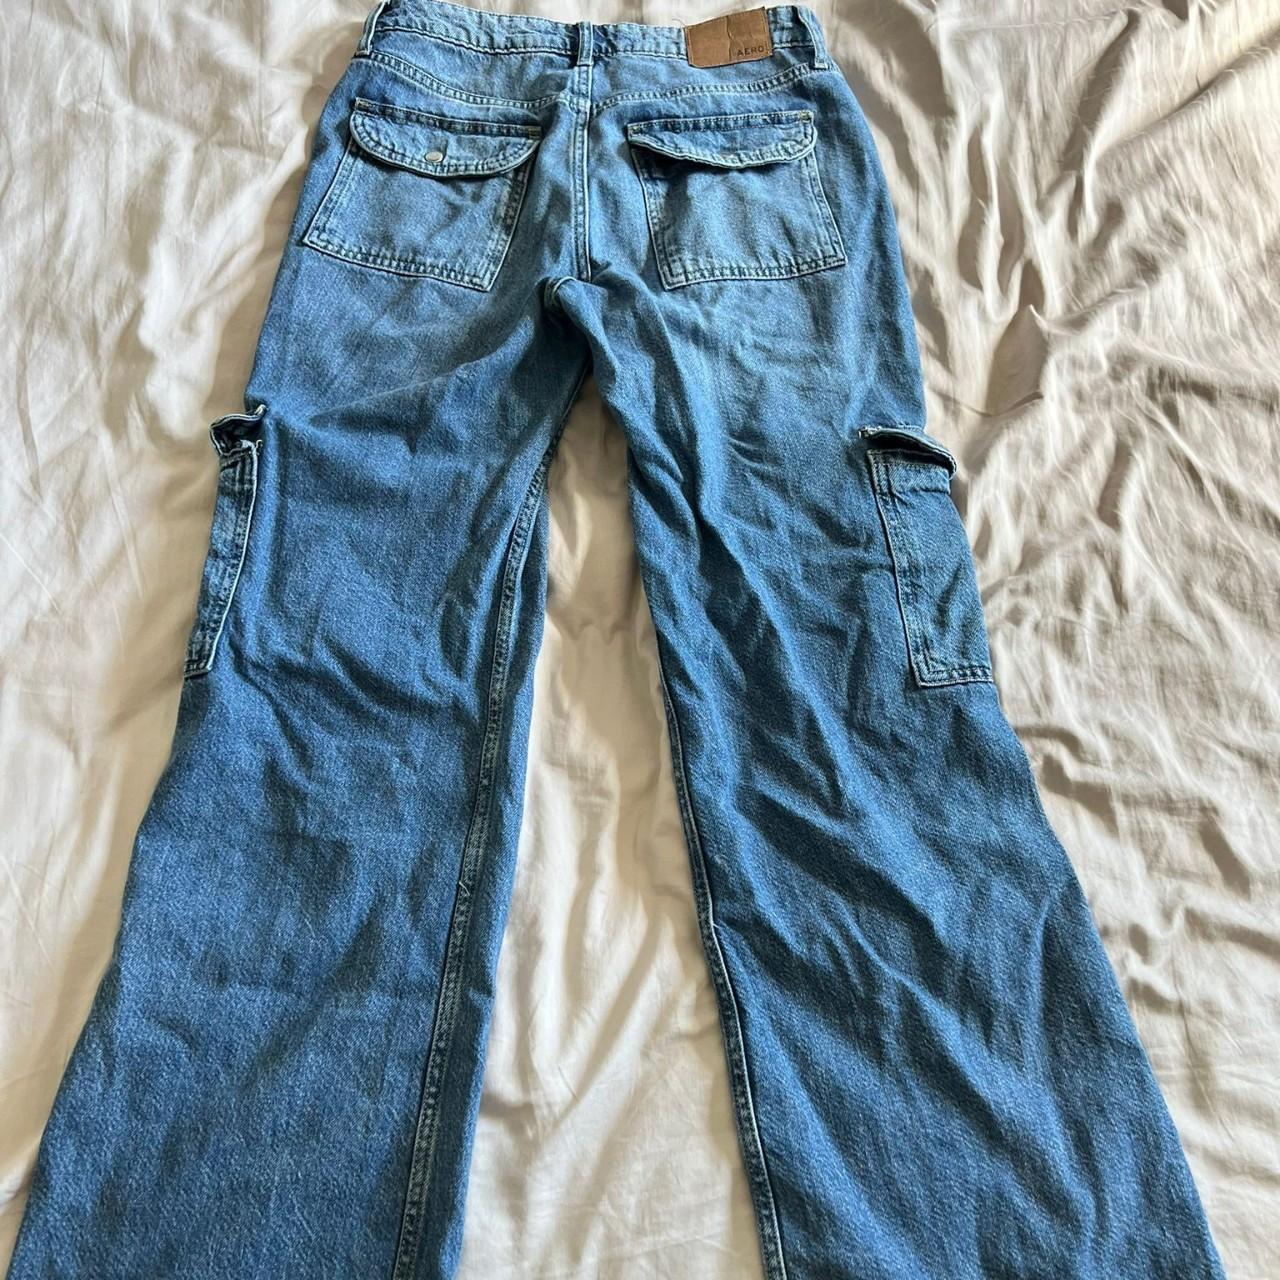 jeans cargo, used, good condition - Depop